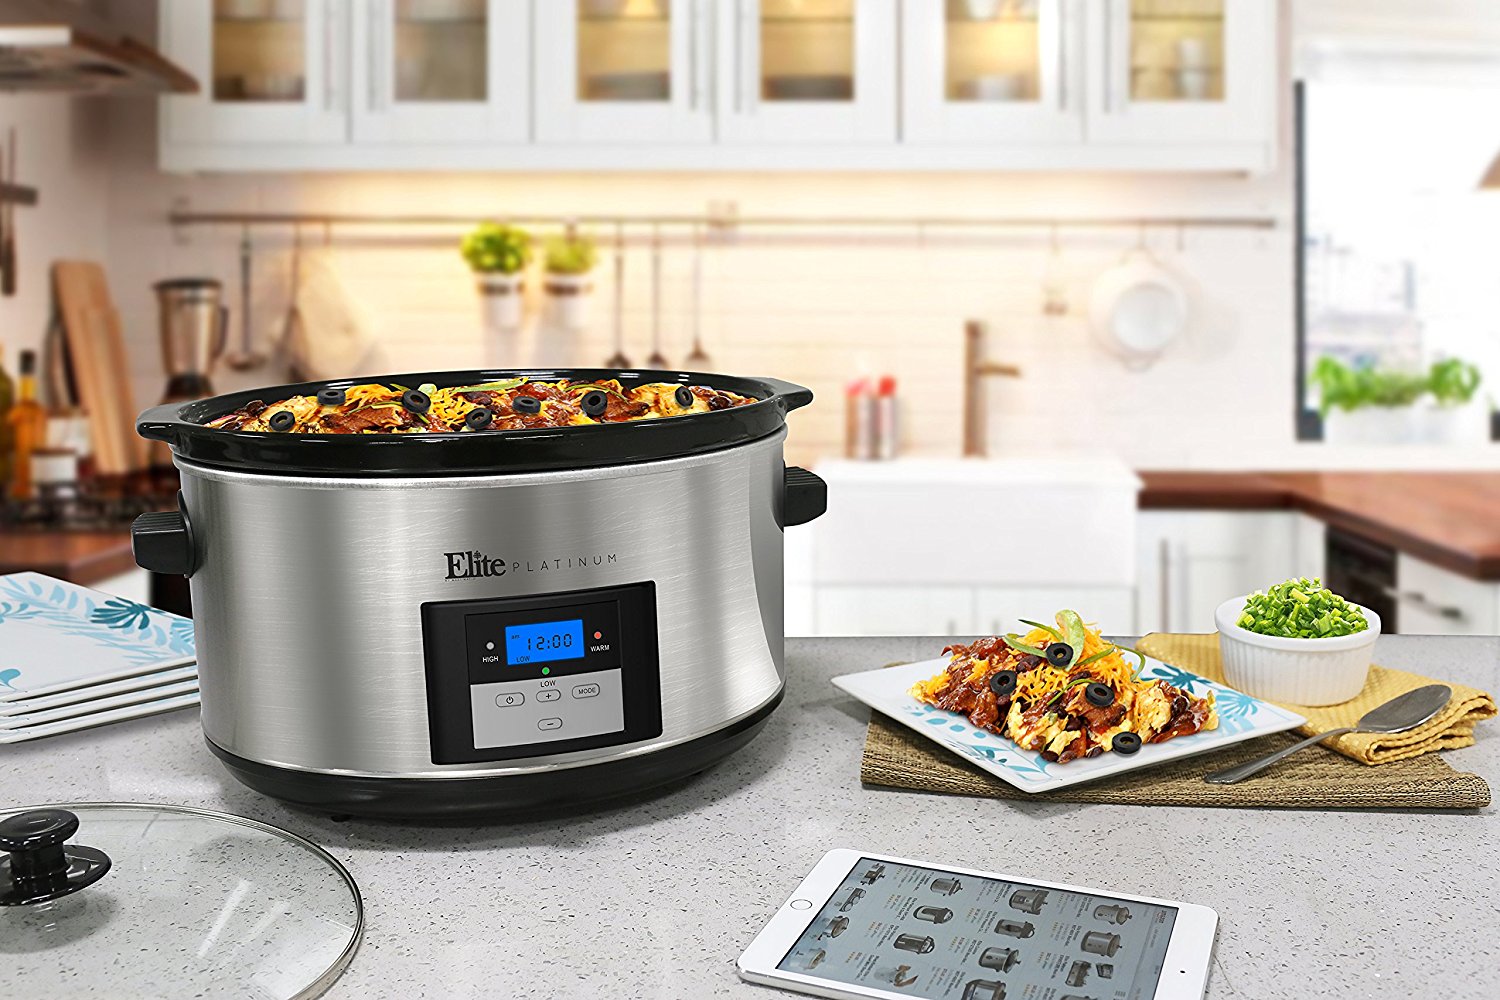 Cuisinart PSC-650 Slow Cooker, 320 W, 6.5 qt Capacity, Ceramic/Stainless Steel